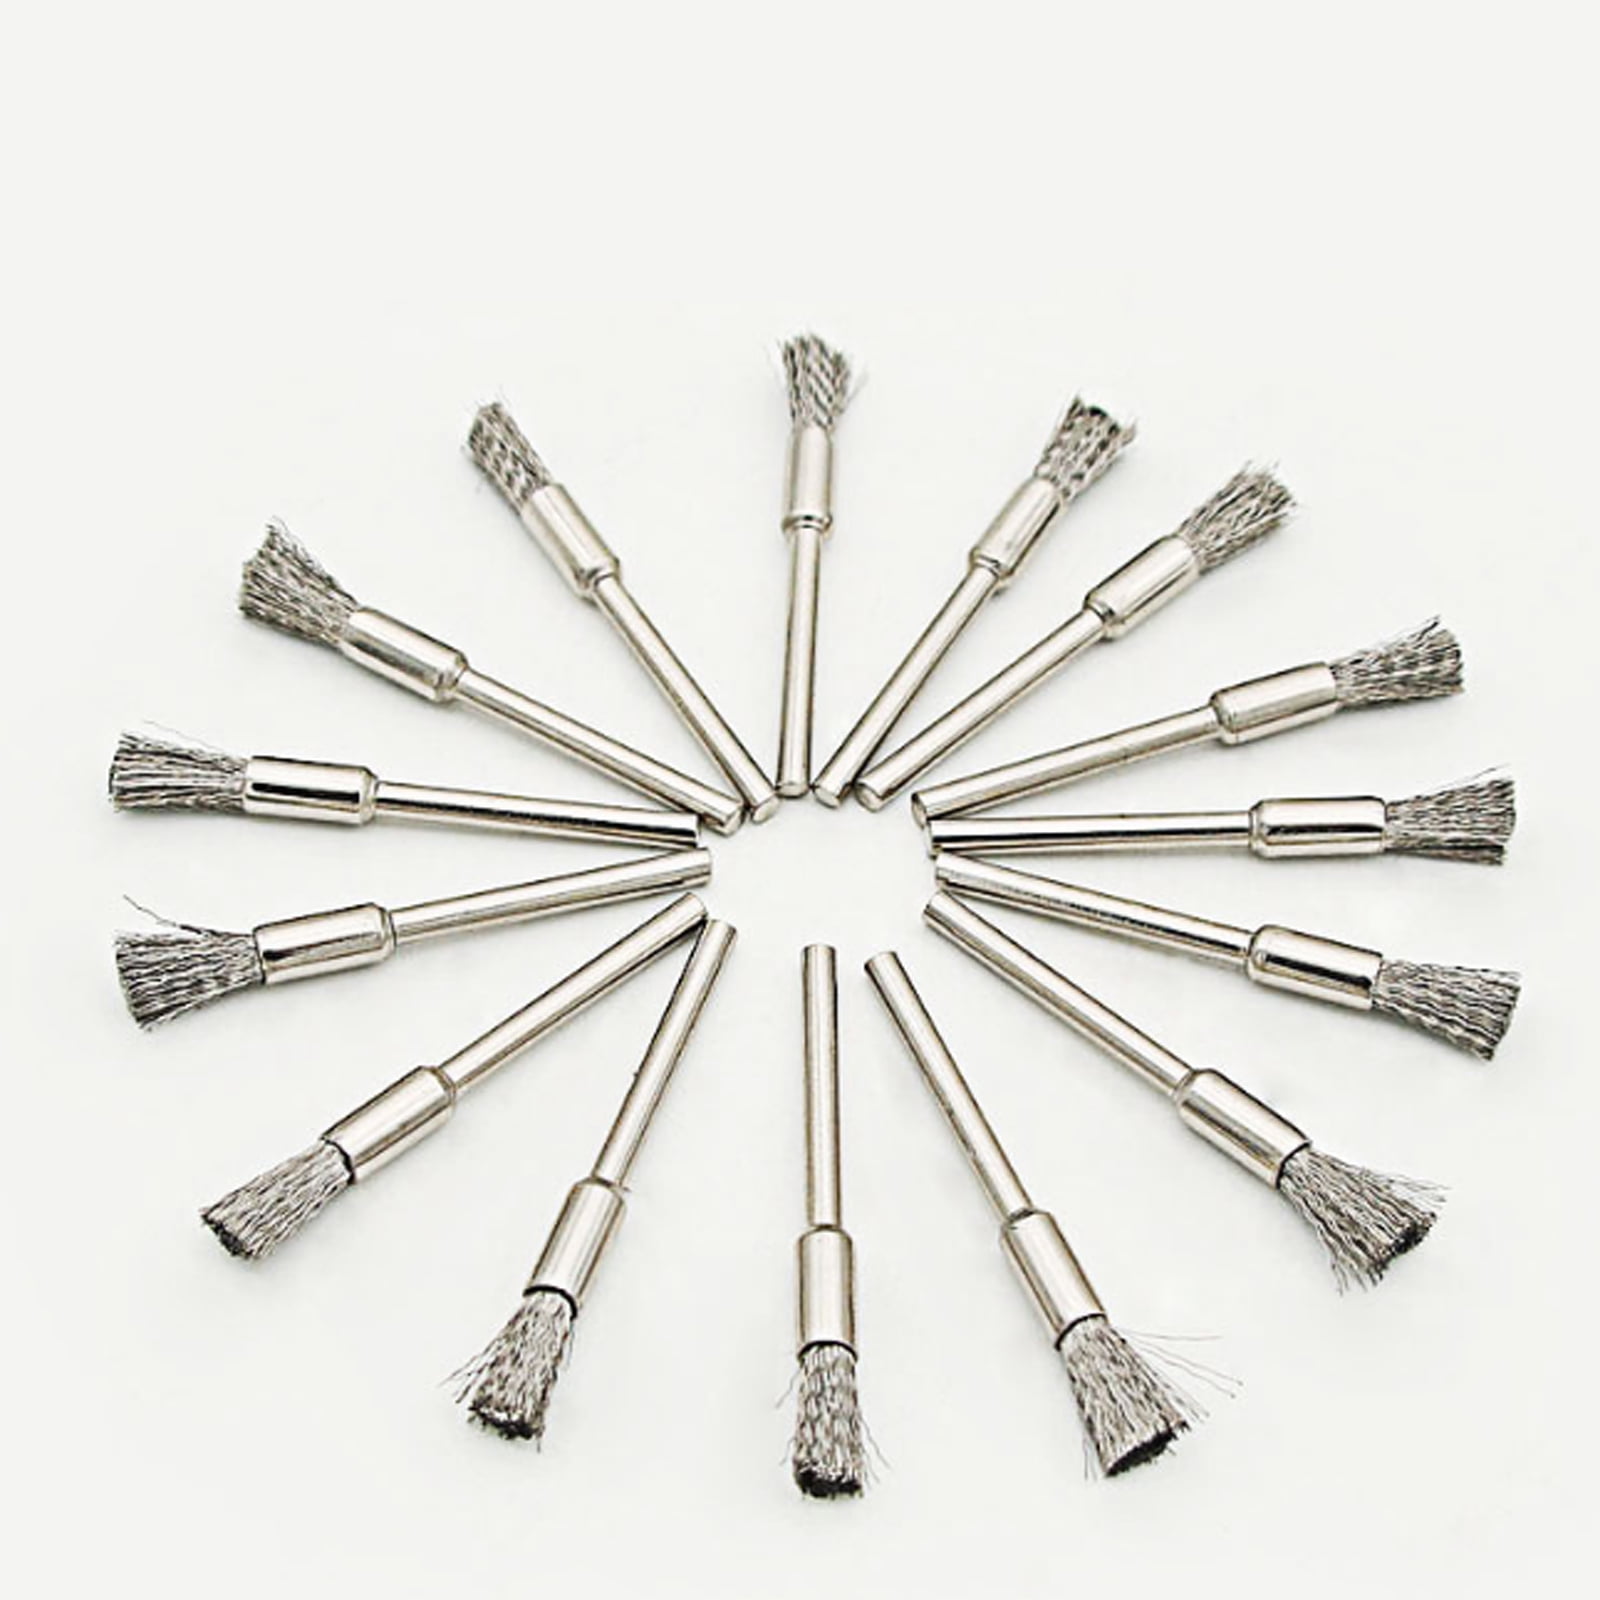 24Pcs Stainless Steel Wire Brush Set Dremel Rotary Tool Die Grinder for Removal